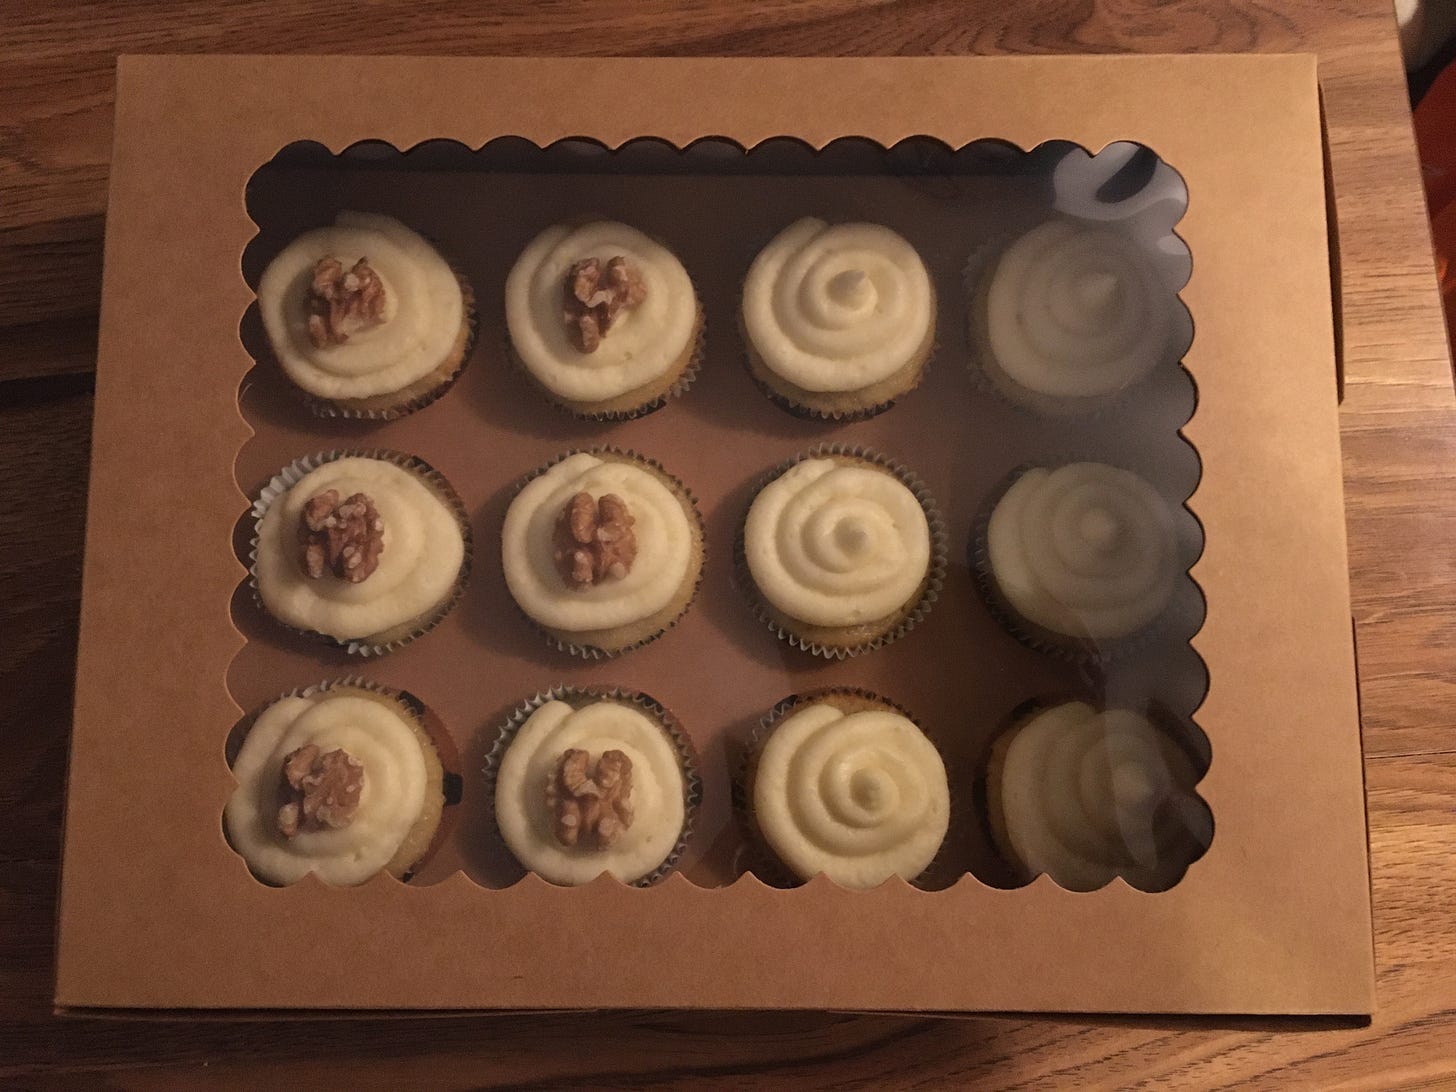 Picture of twelve banana cupcakes in craft paper box.